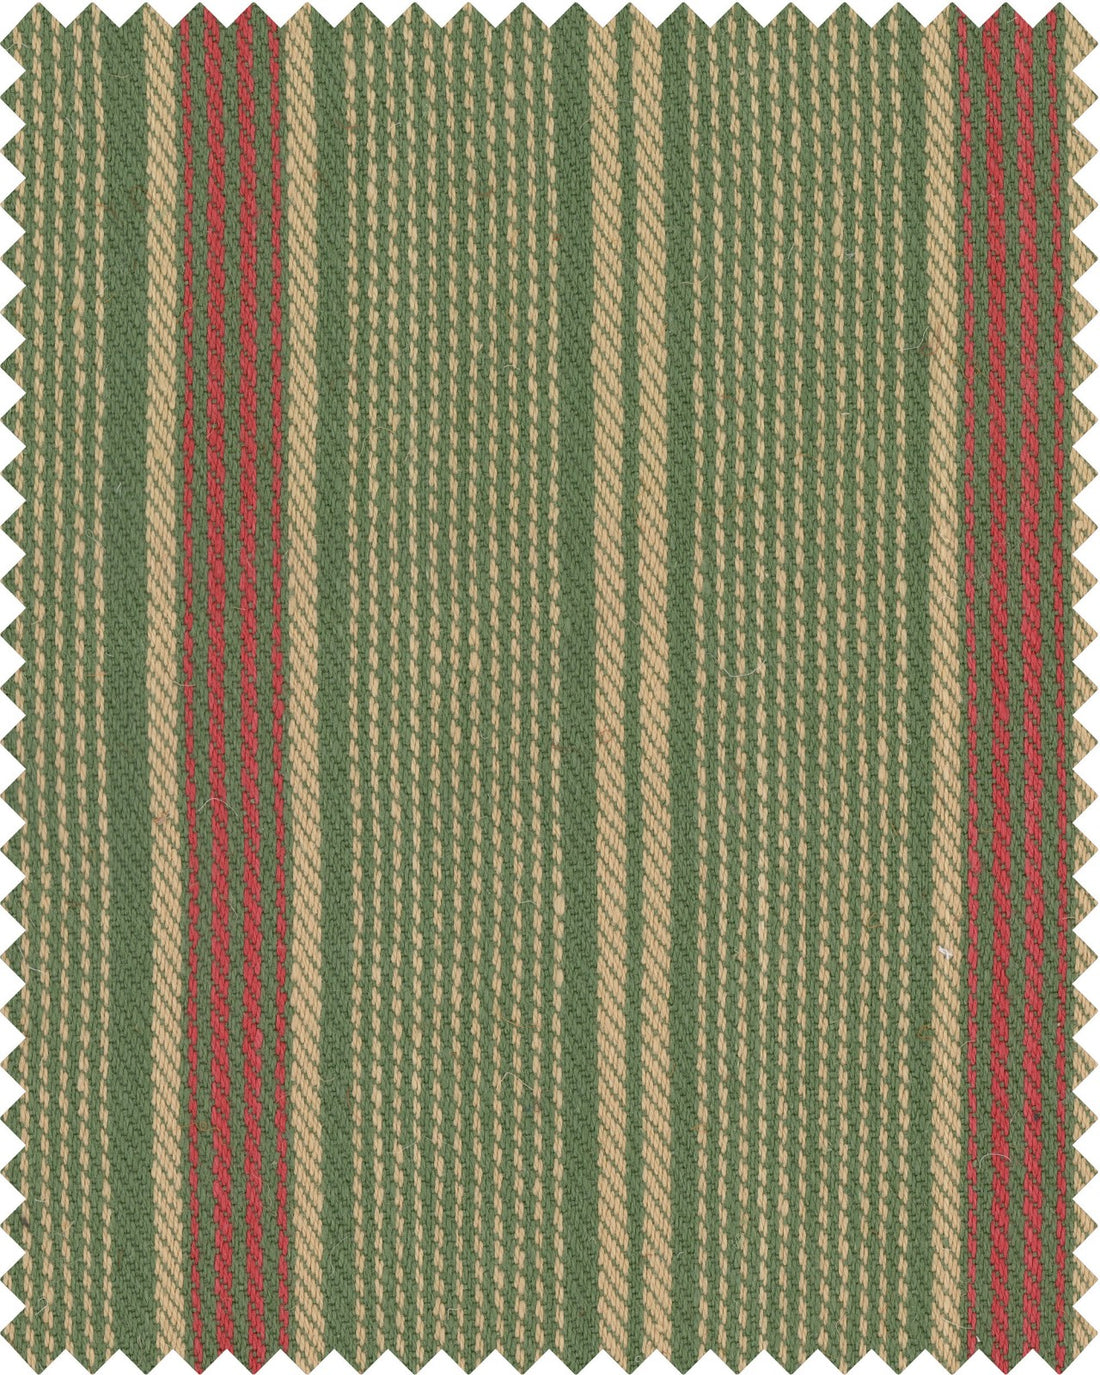 Tyrolean Stripes fabric in green red taupe color - pattern number FB00107 - by Mind The Gap in the Tyrol Apres-ski Home Collection collection